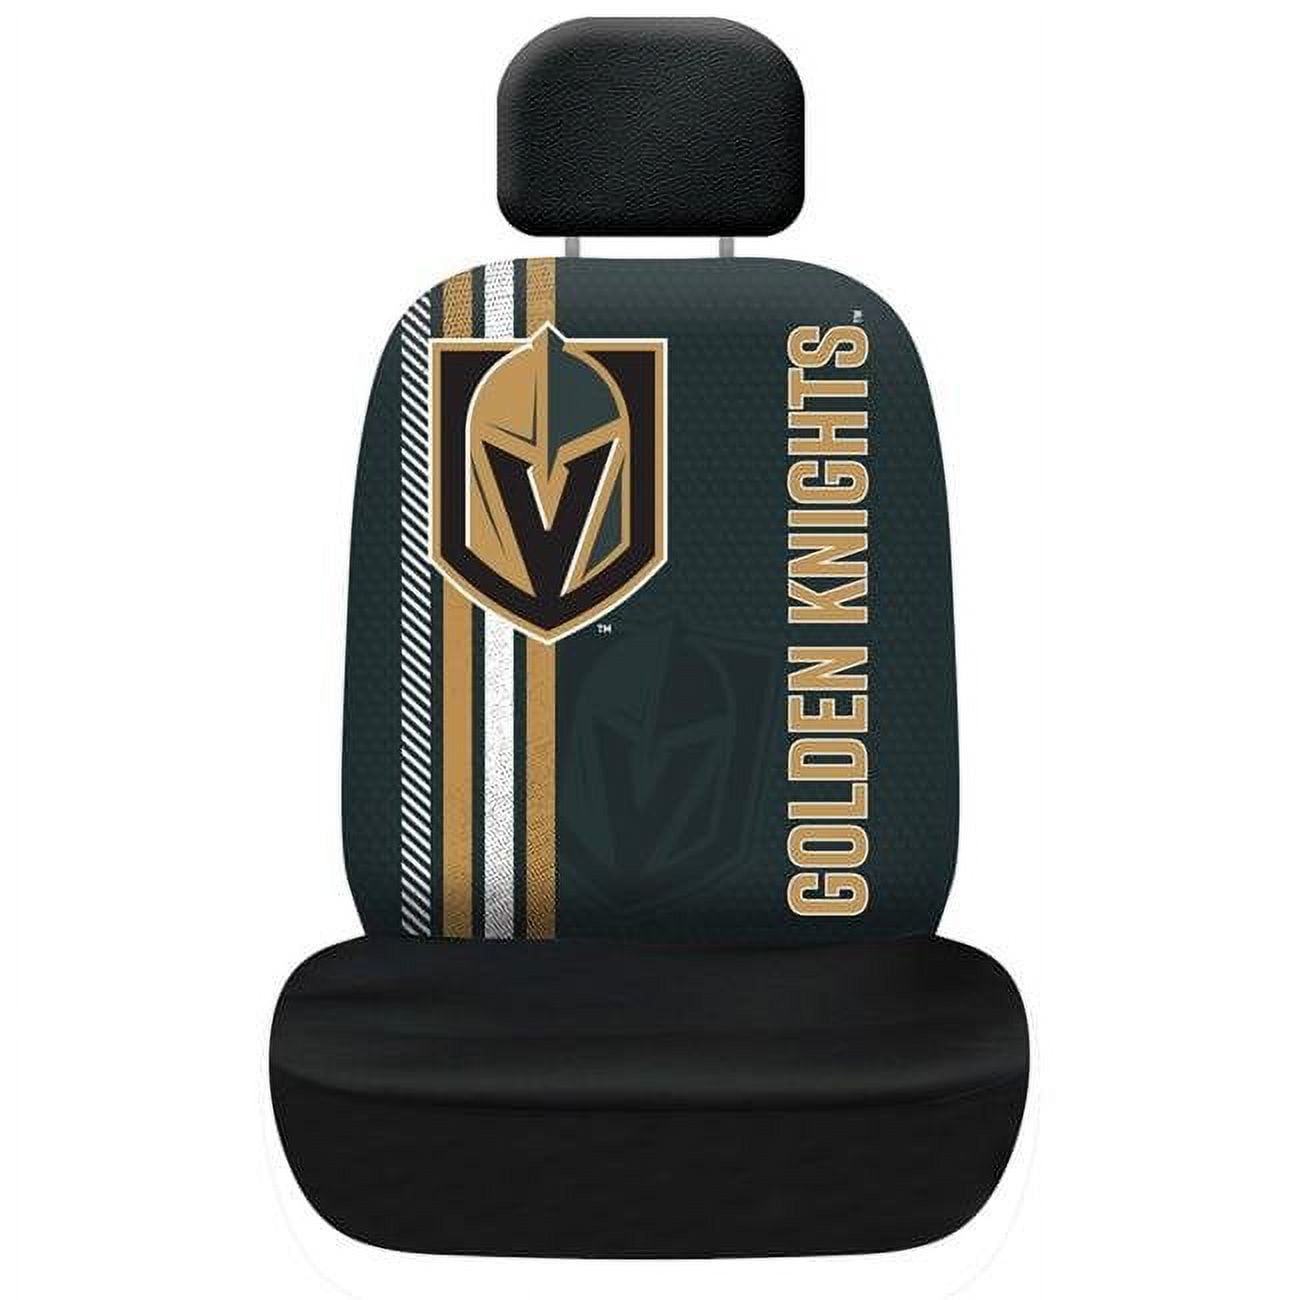 Fremont Die  Vegas Golden Knights Rally Design Seat Cover -  Fremont Die Consumer Products Inc, FR53014